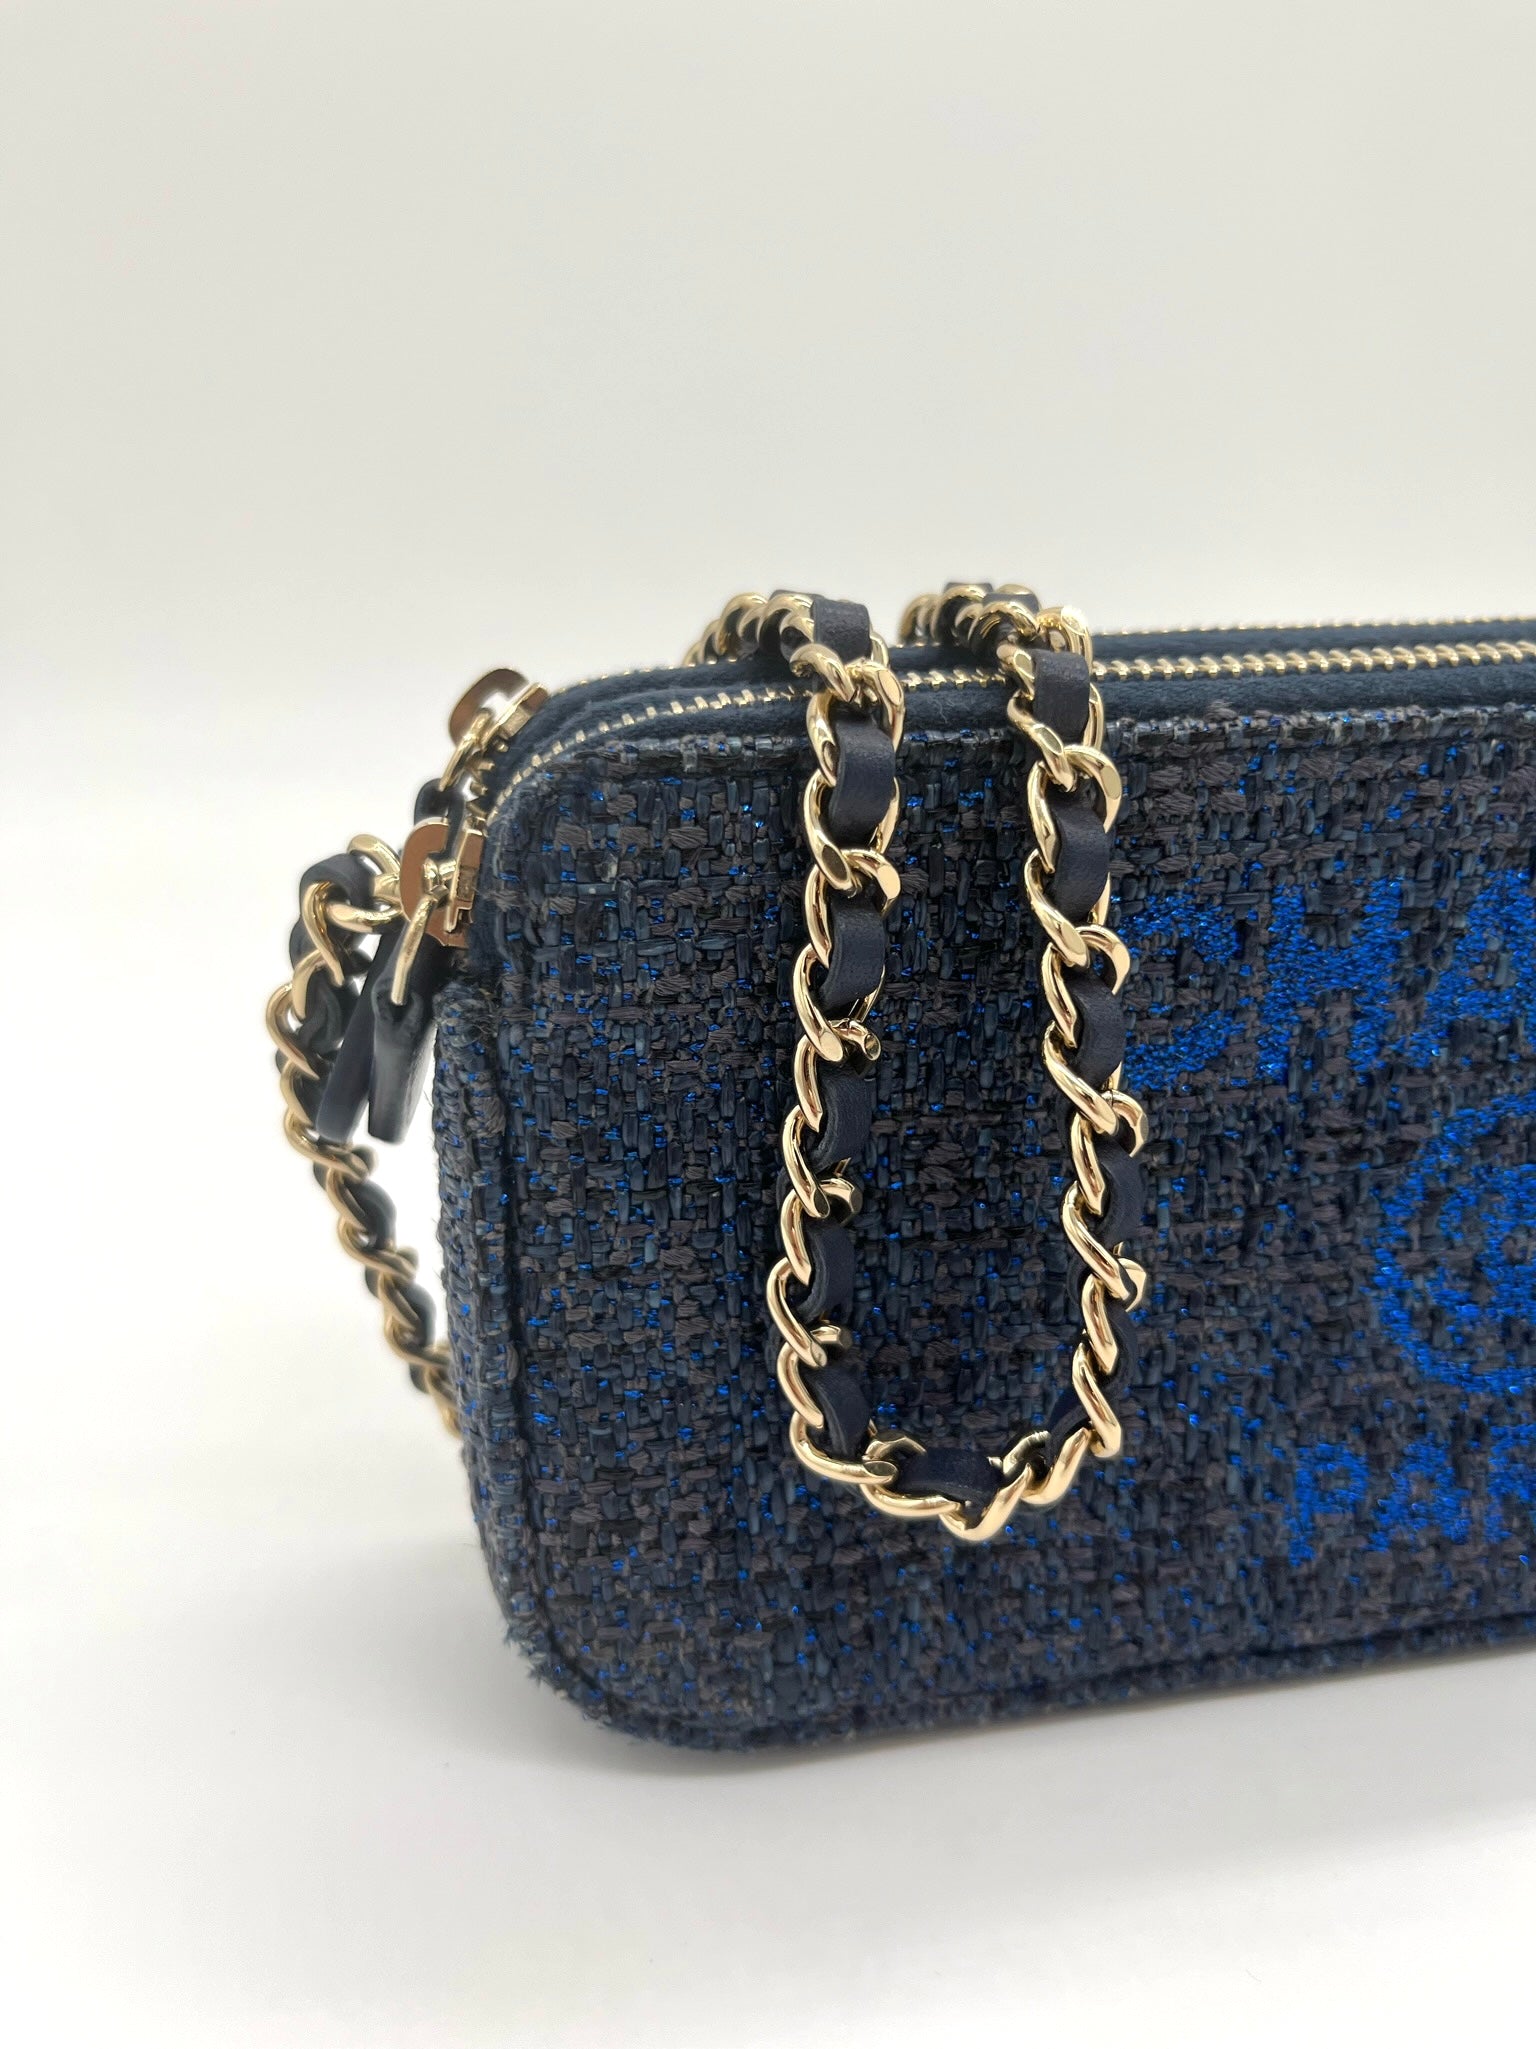 Chanel Canvas Small Deauville Clutch Crossbody